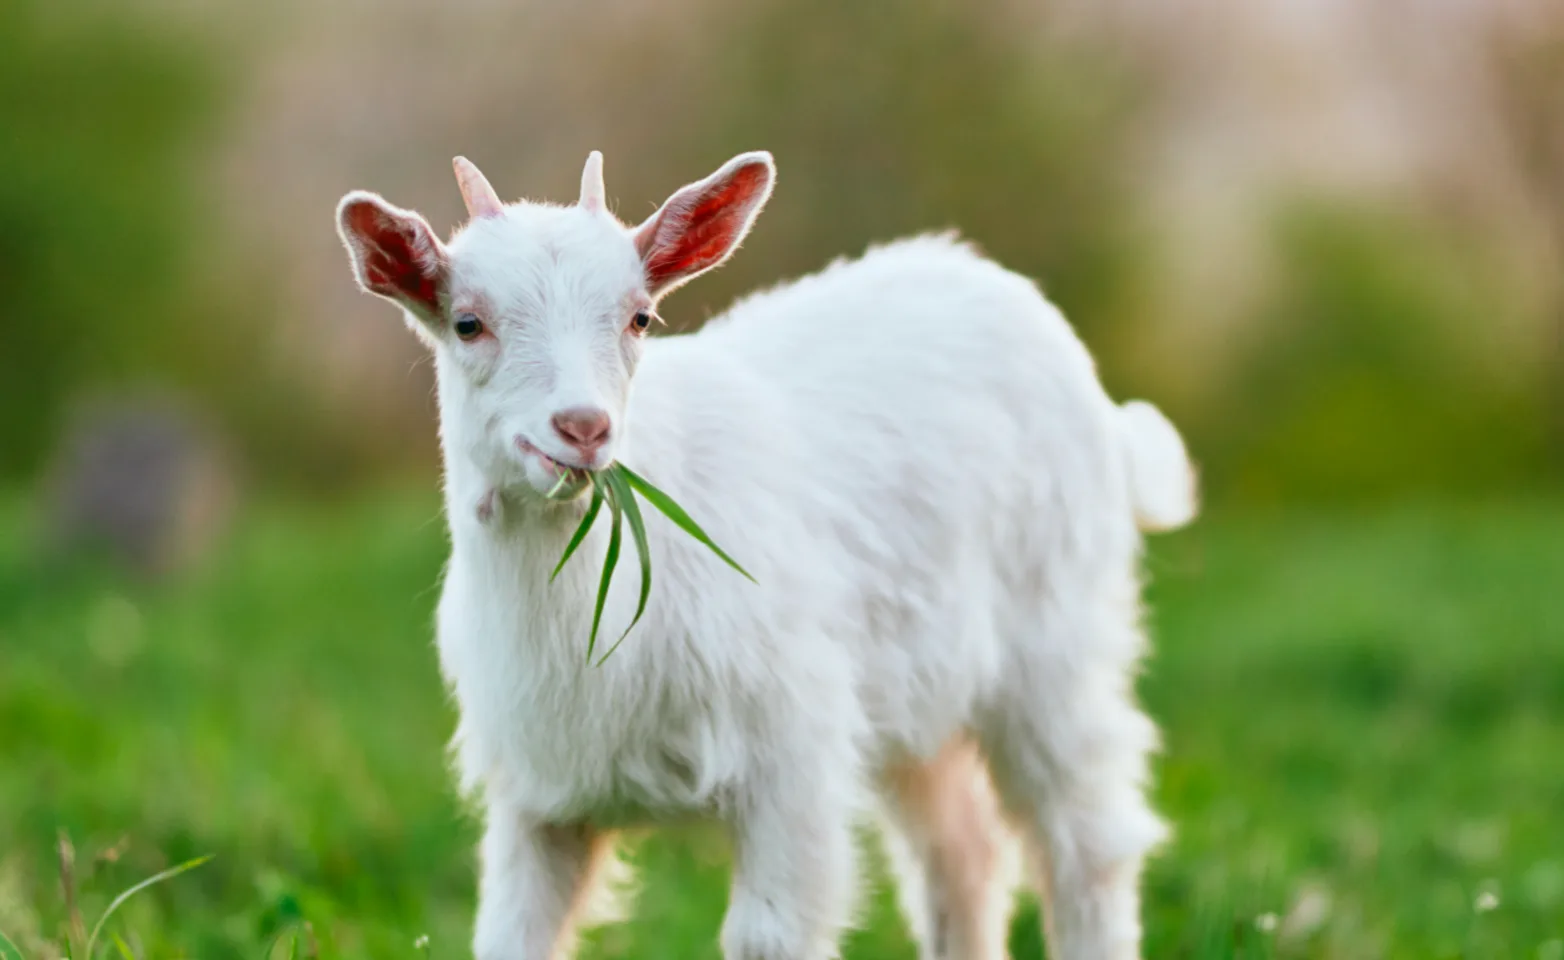 Goat eating grass while sitting in grass